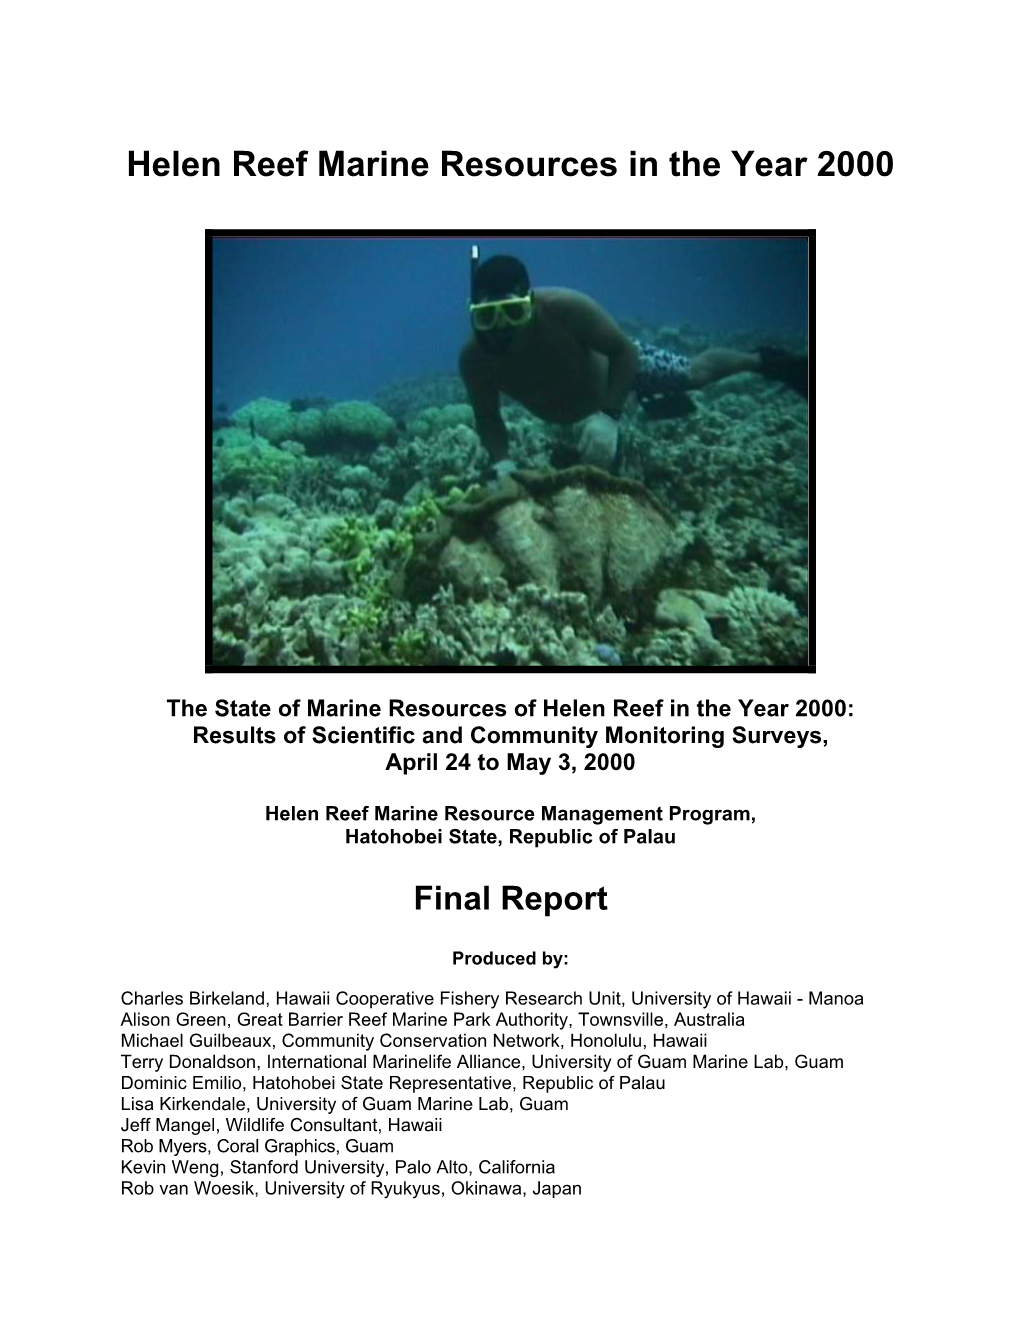 Helen Reef (Palau) Resources in the Year 2000